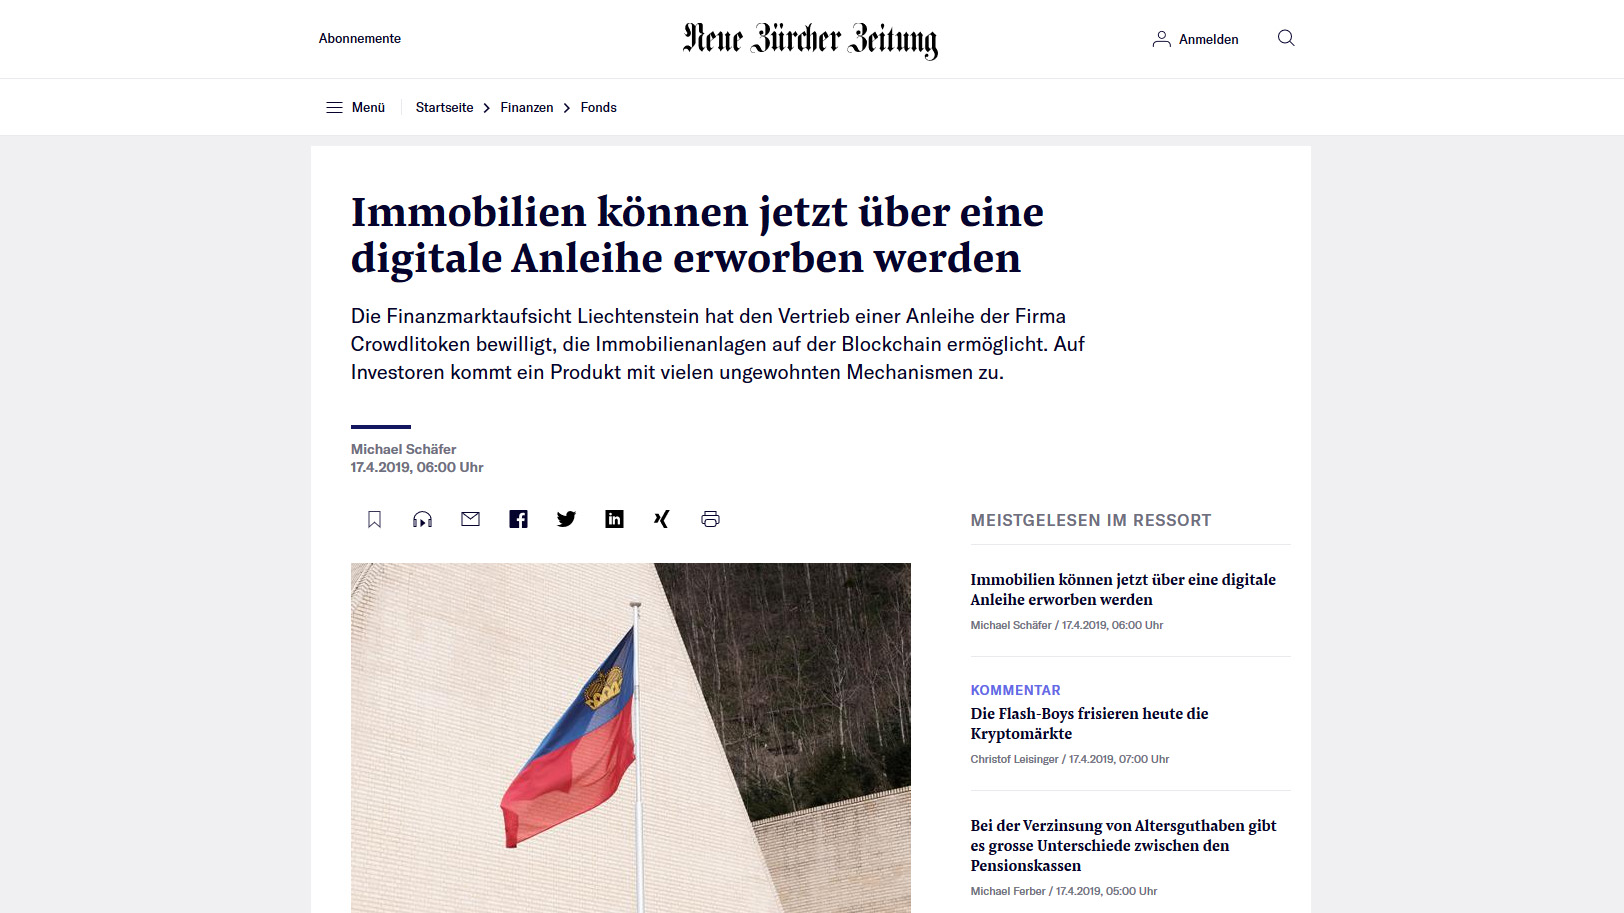 You are currently viewing Background story CROWDLITOKEN in the NZZ